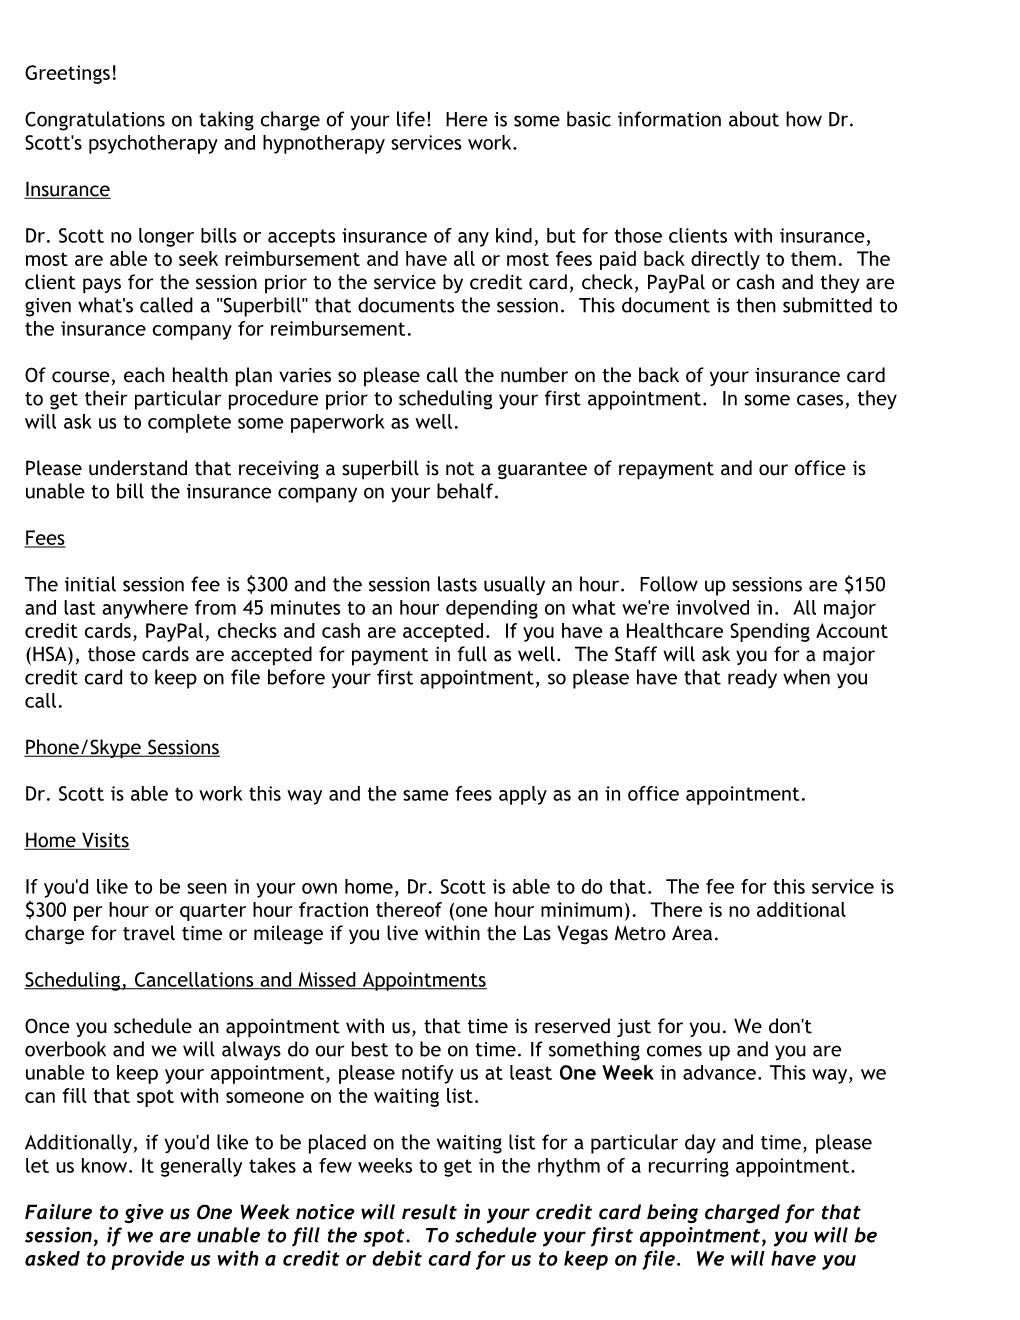 Dr. Scott Private Client Information Sheet and Agreement